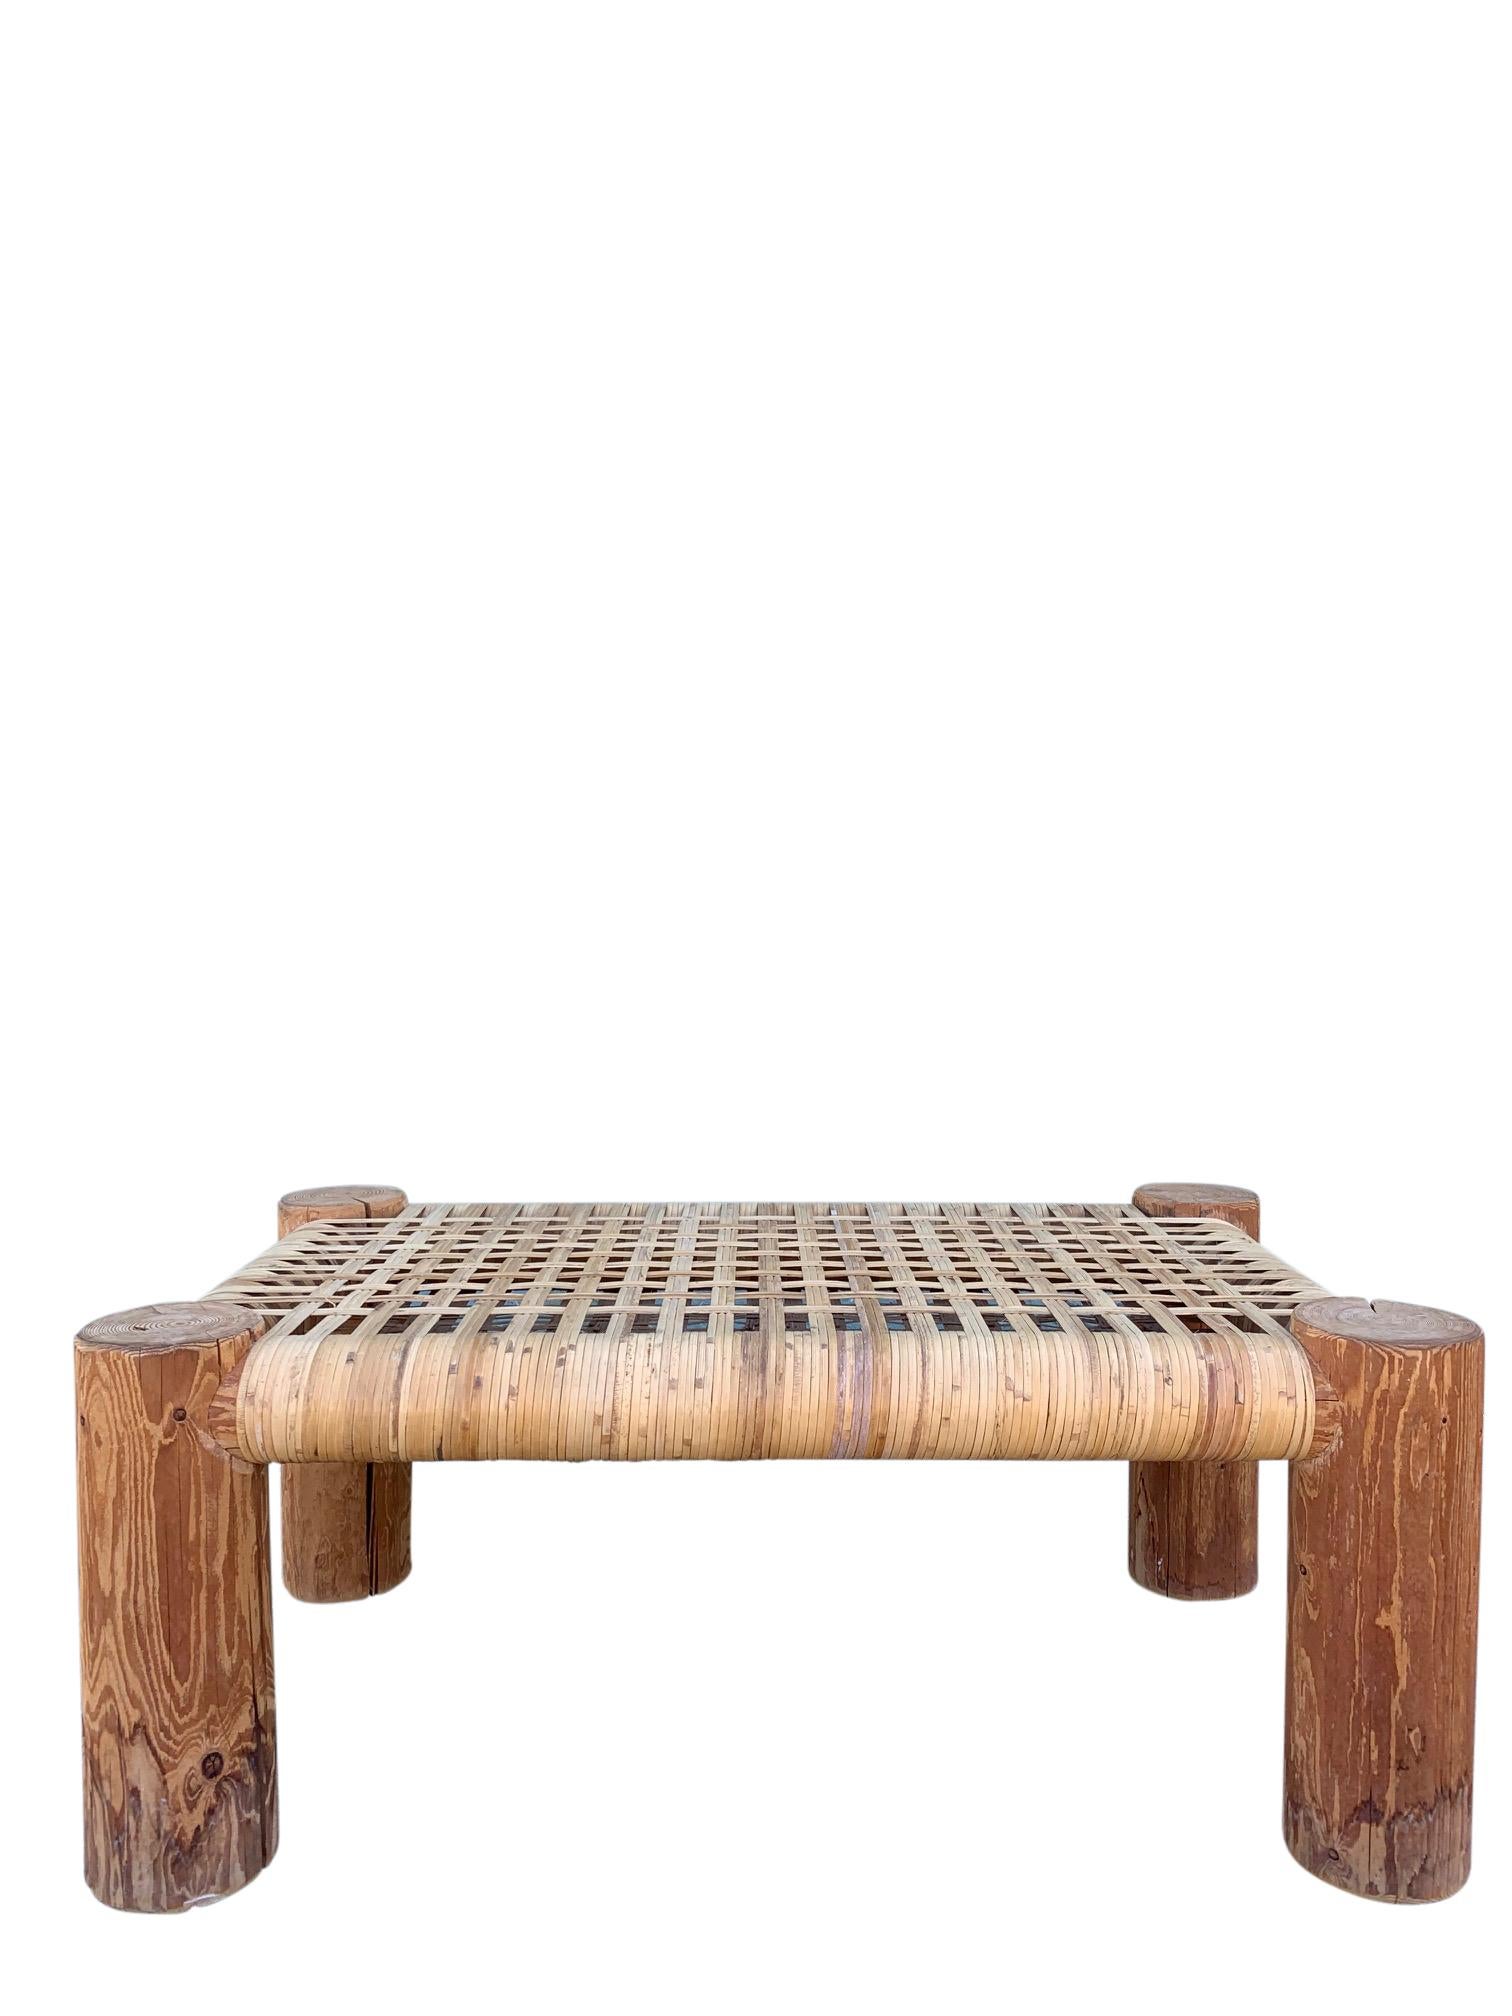 North American Cane Wicker Wrapped Modern Rustic Wood Bench Table For Sale